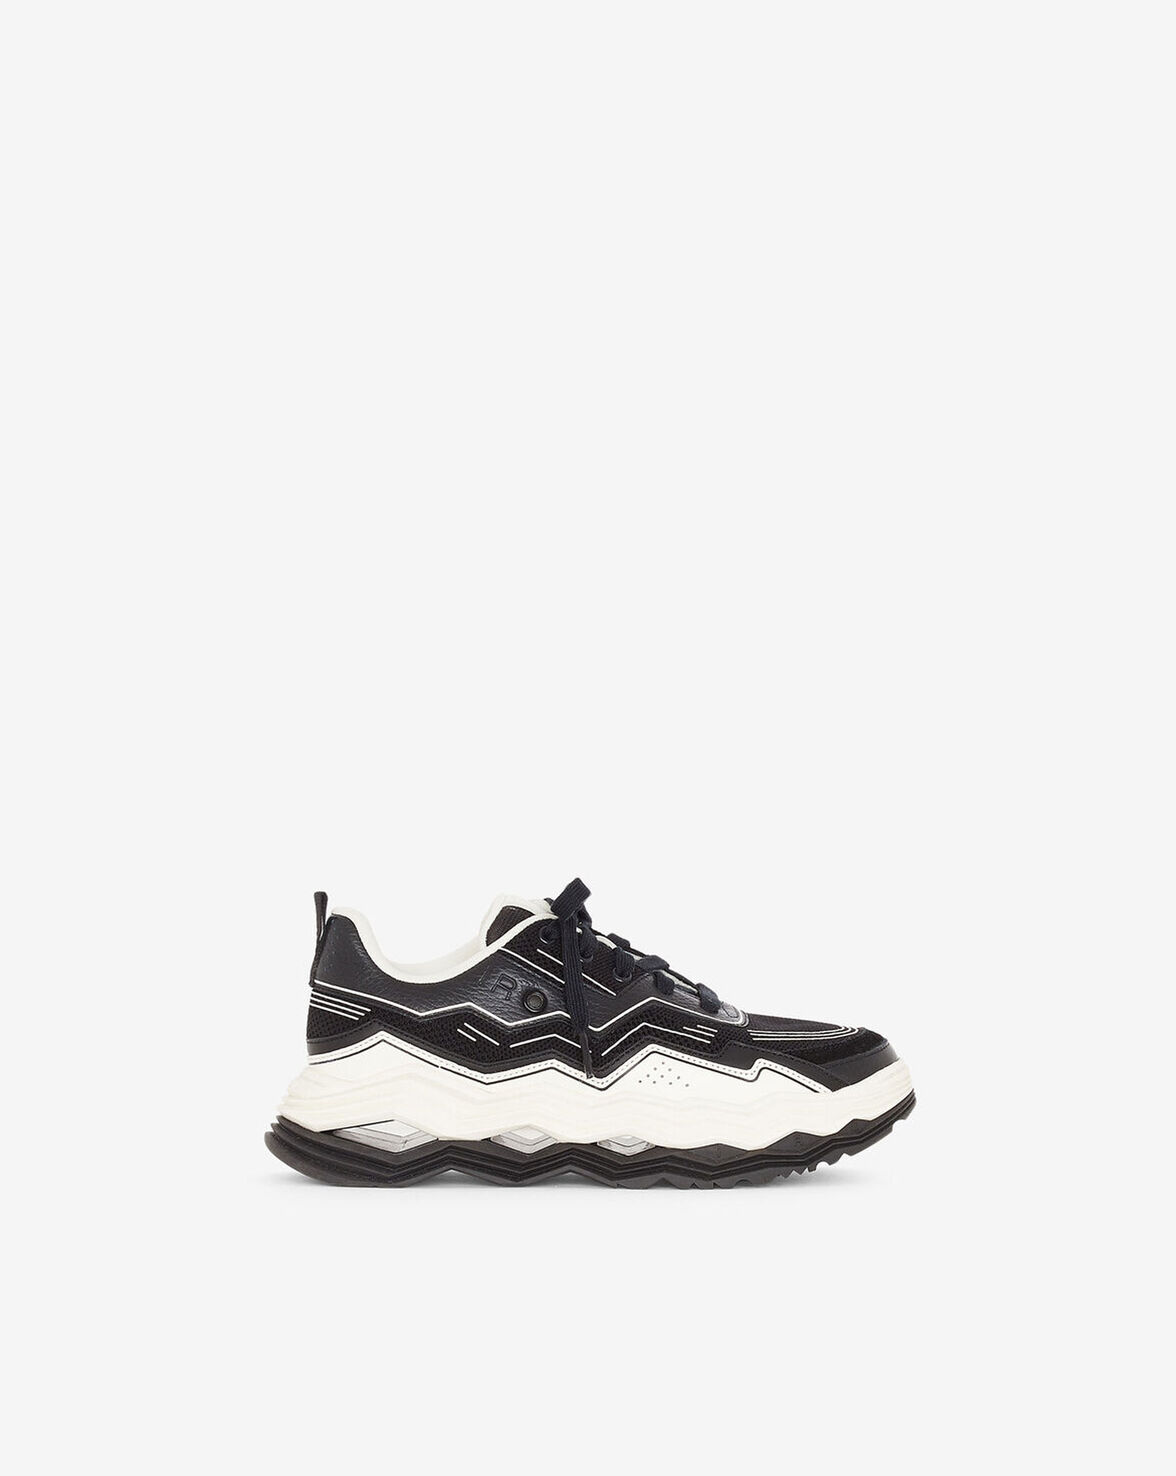 IRO FALL 23 COLLECTION | WAVE SNEAKERS